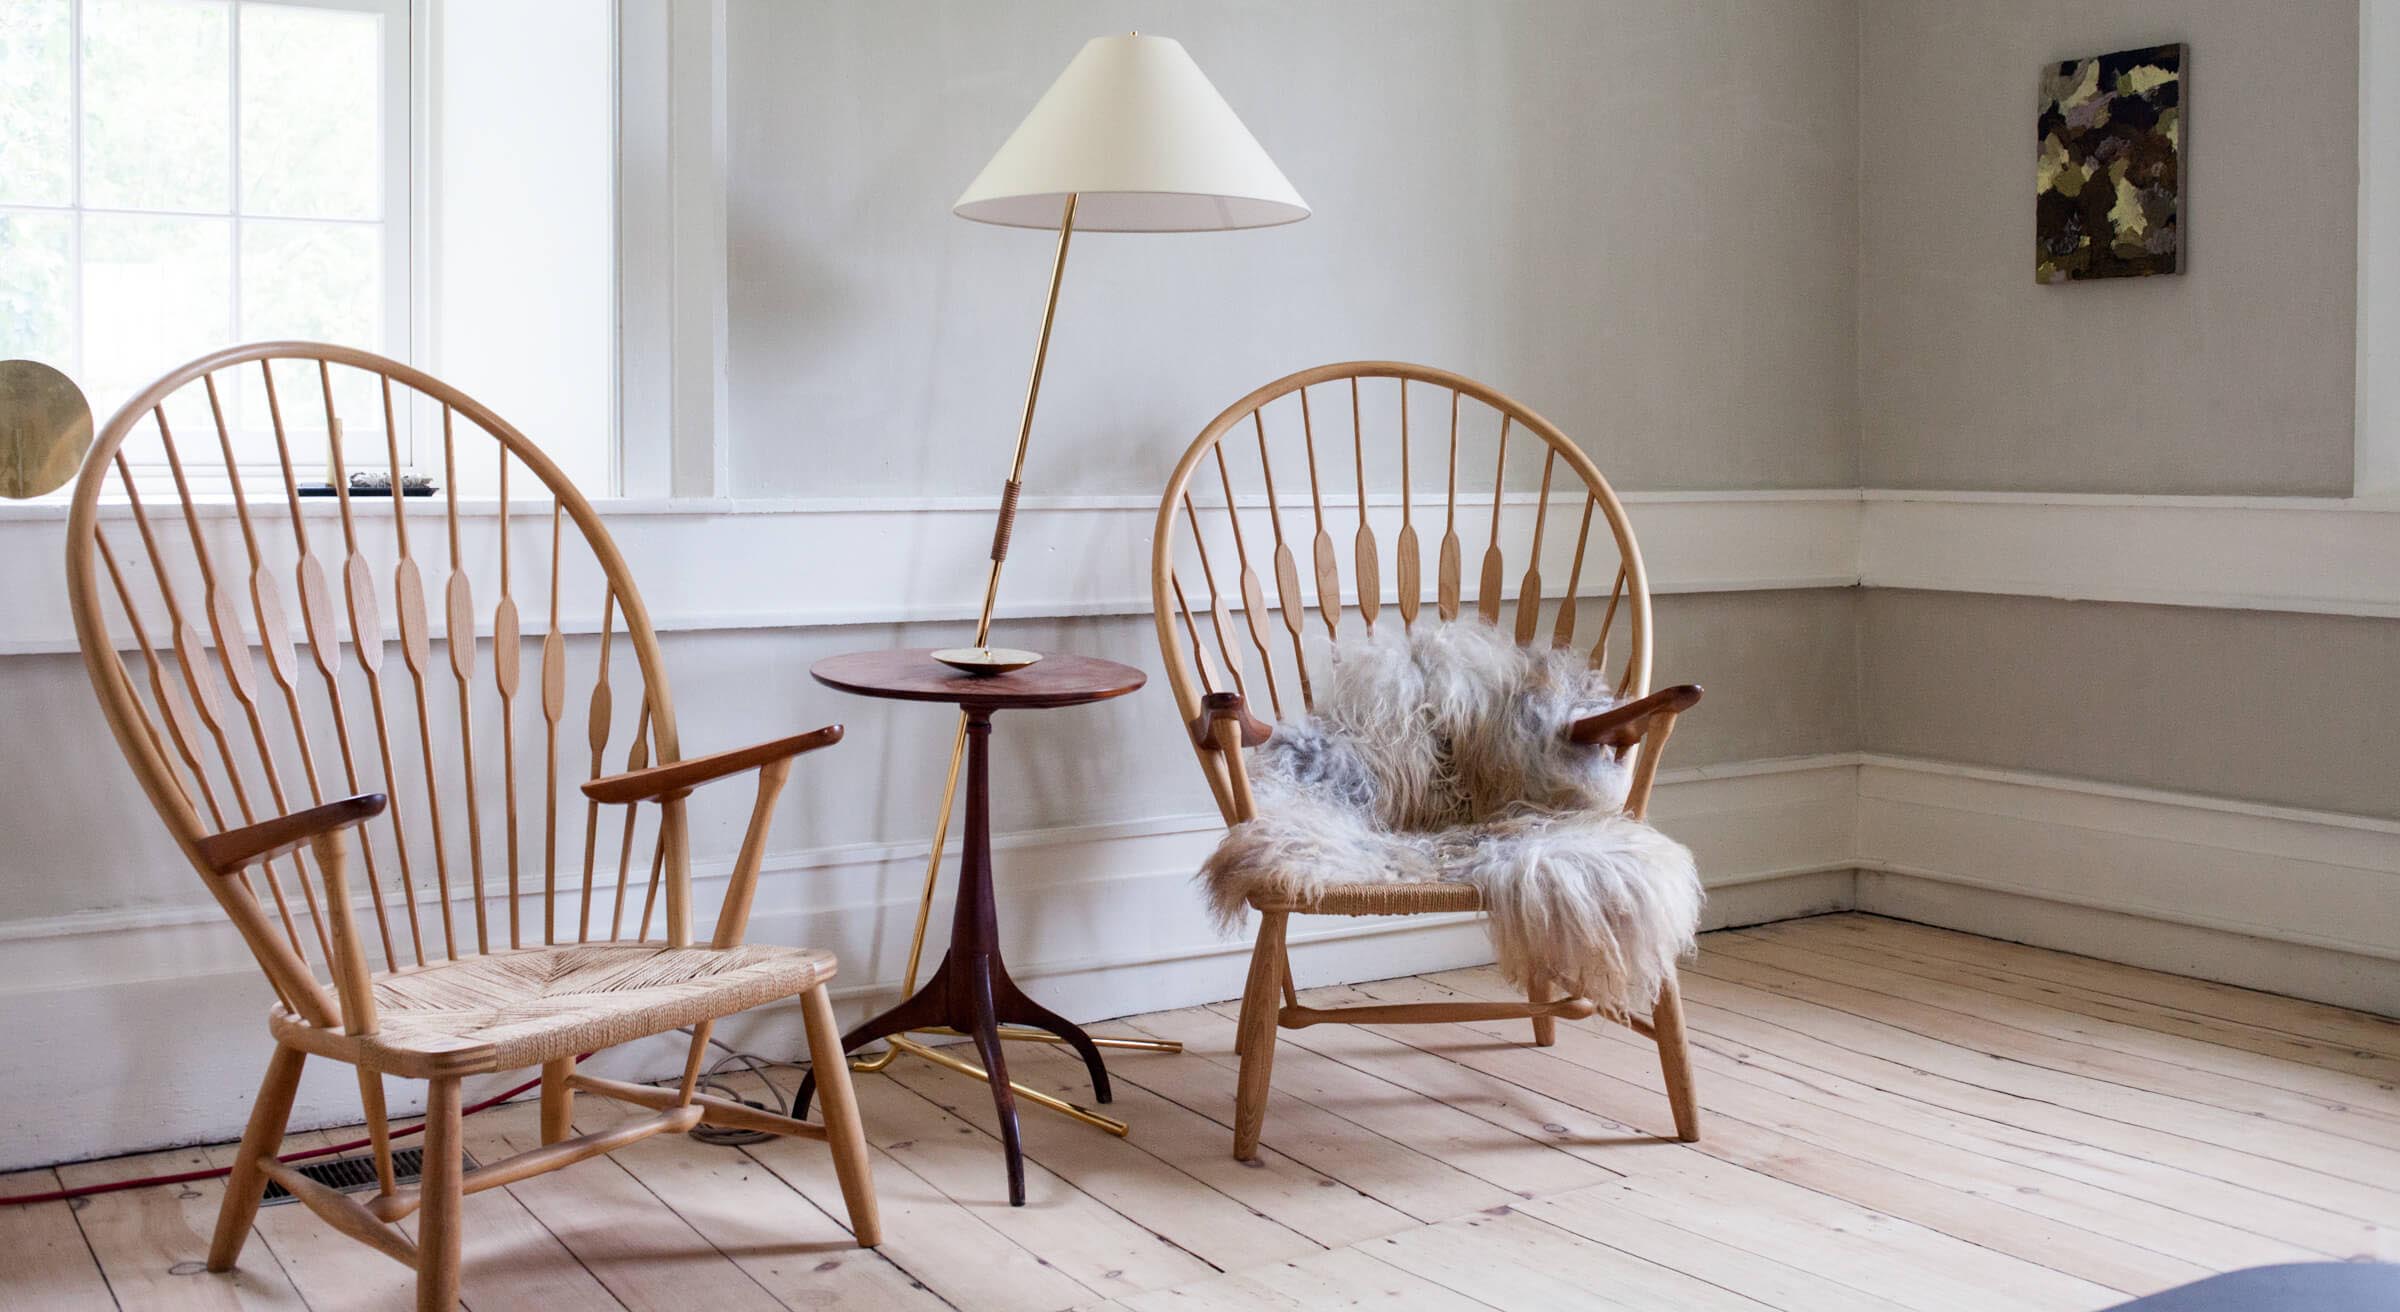 A comprehensive guide to mid century chairs for the 21st century home